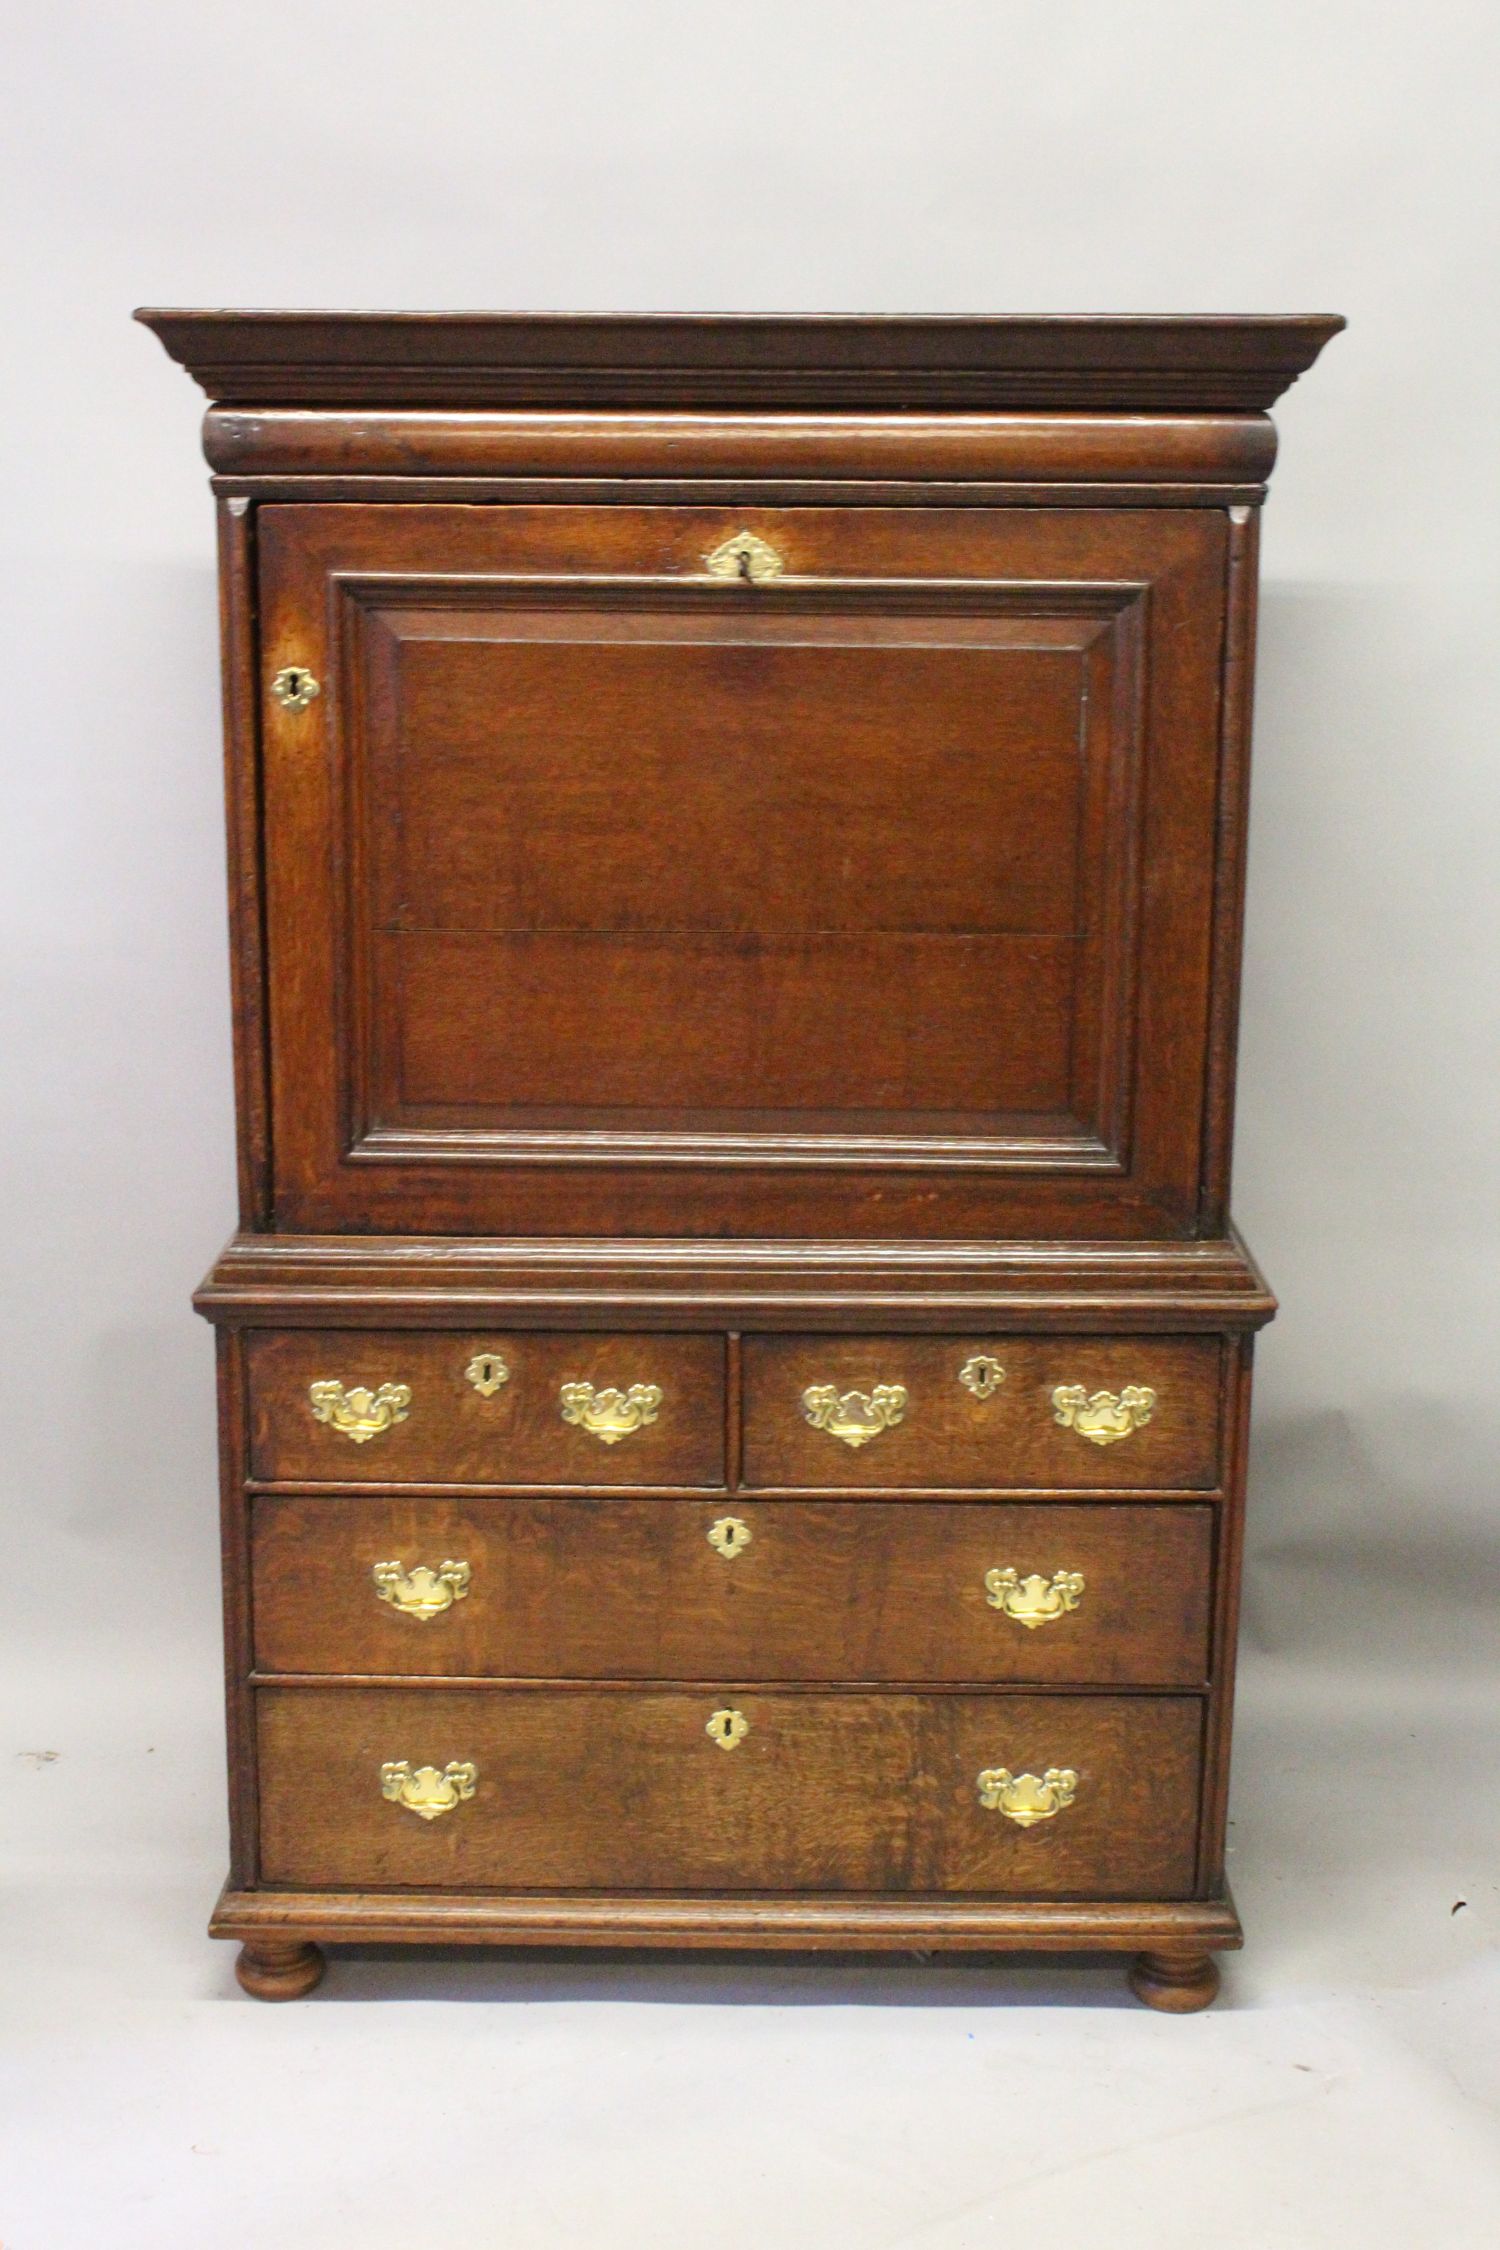 AN 18TH CENTURY OAK ESCRITOIRE, with frieze drawer, panelled drop flap opening to reveal a cupboard, - Image 2 of 2